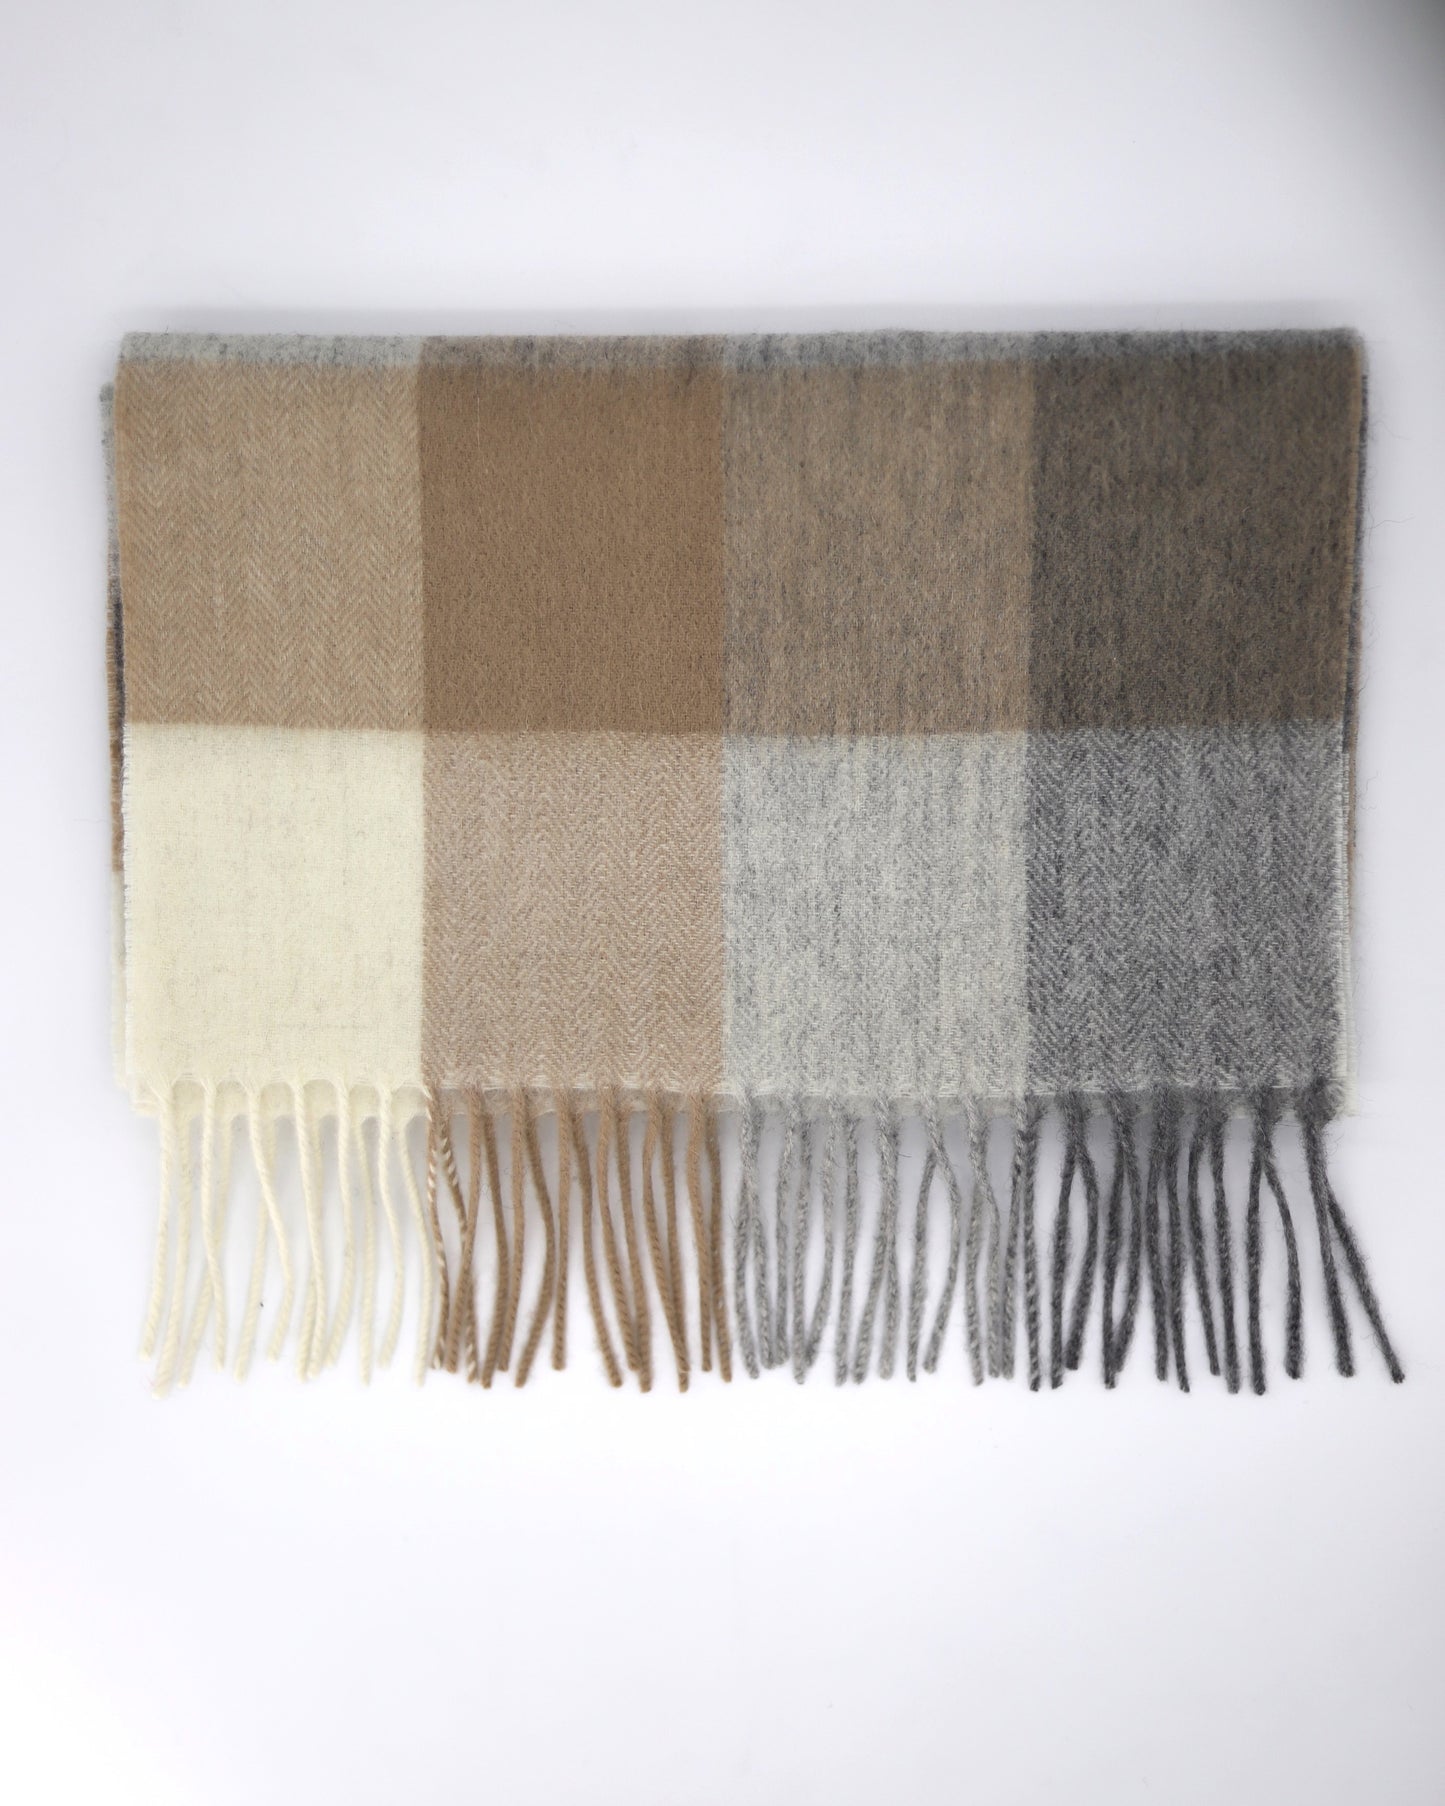 This Scarf is a finest 100% natural wool scarf in a classic checked pattern from Villanelle. A luxurious accessory for women and made from the softest natural wool for extreme comfort and warmth. It is made in a trendy combination of light grey, beige and creamy color. This product is sourced and manufactured in Poland.